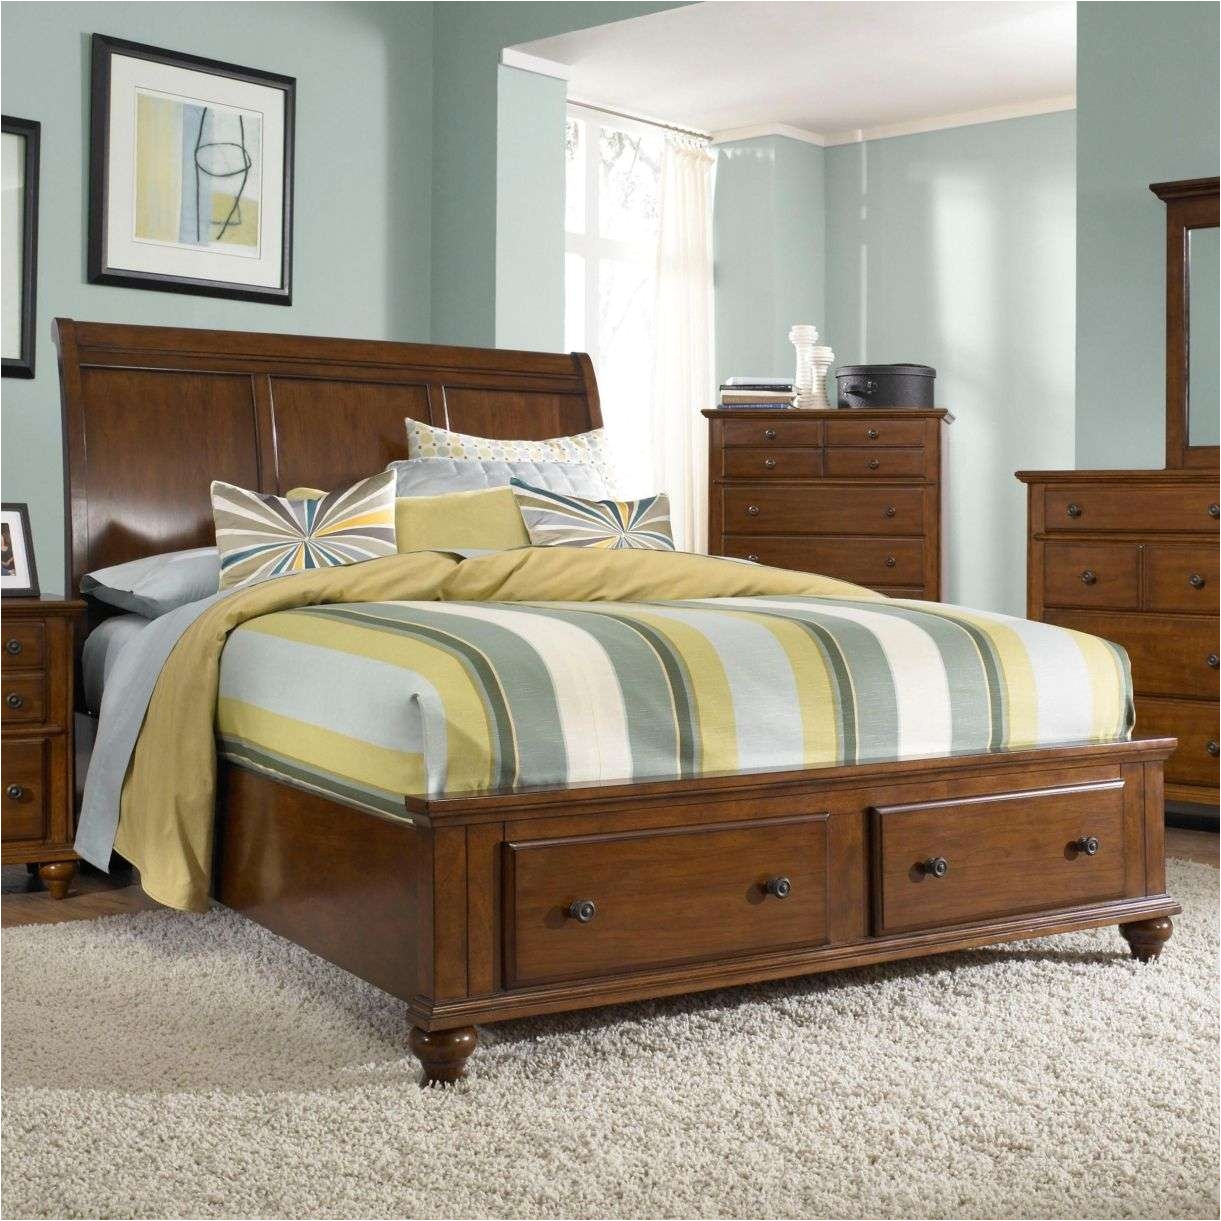 raymour and flanigan bedroom furniture unique raymour flanigan bedroom furniture cool storage furniture check